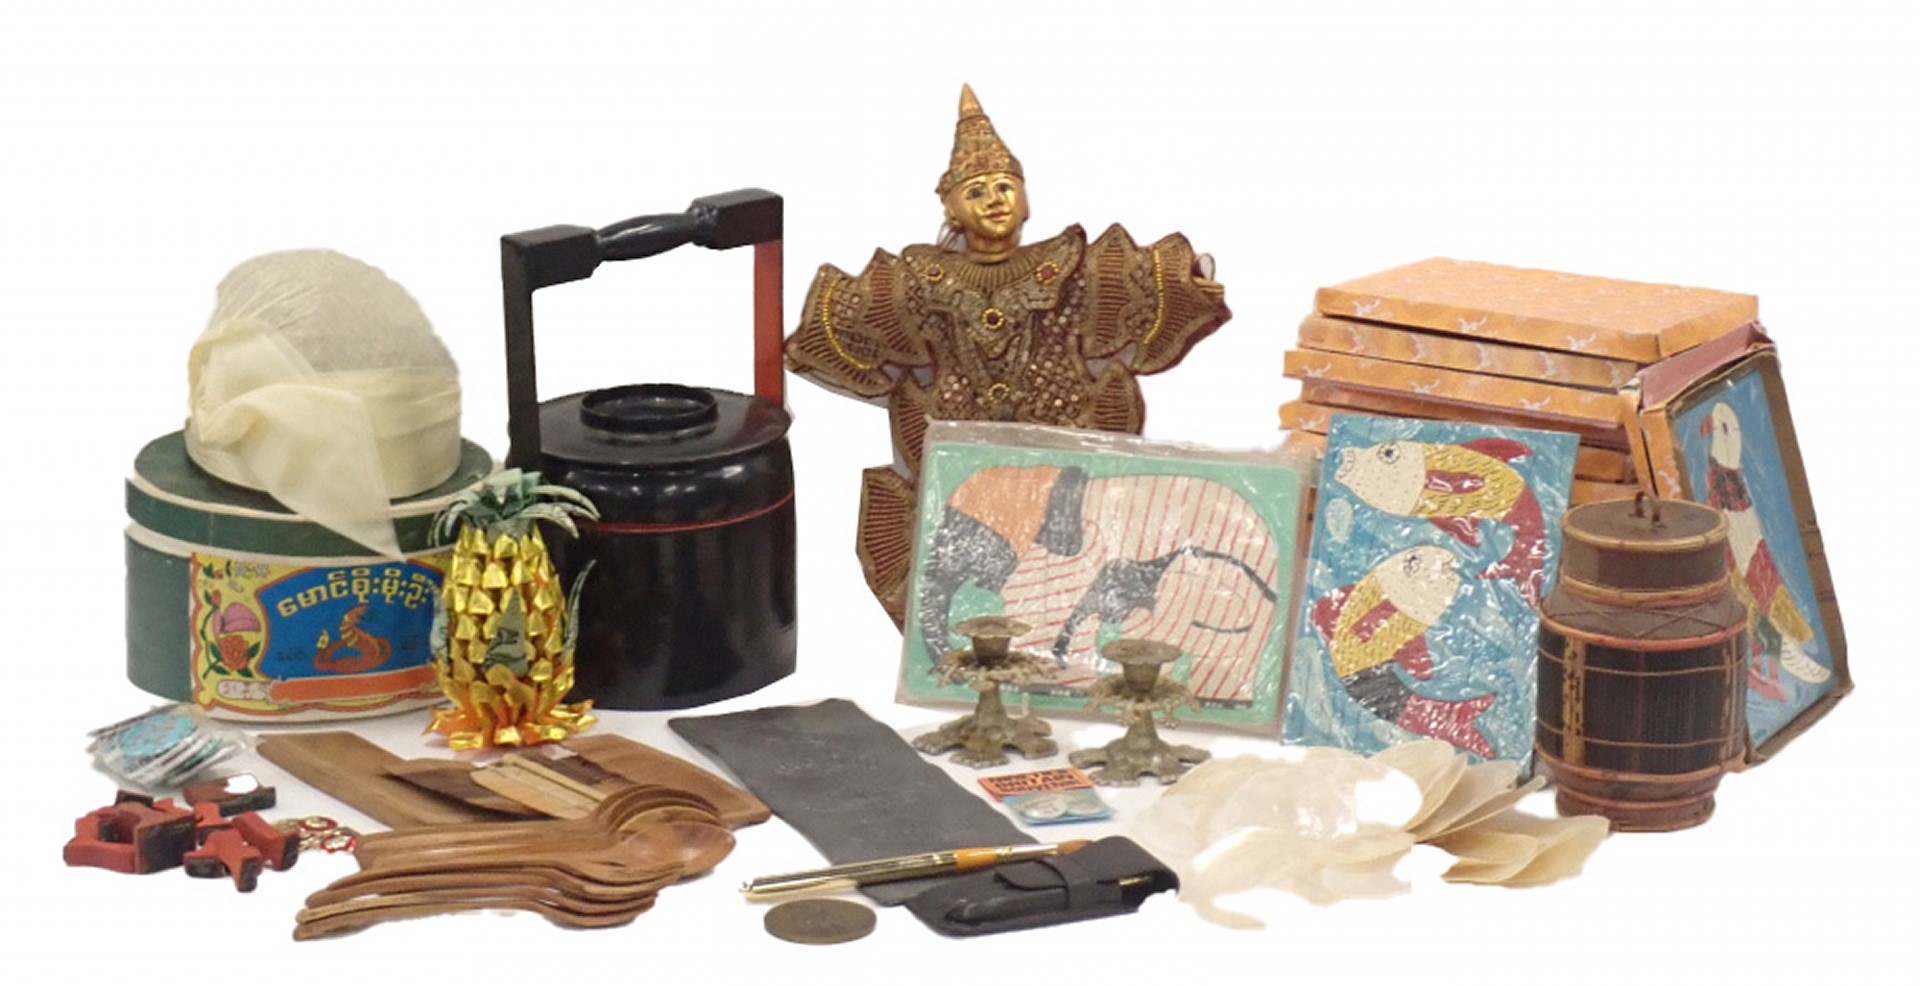 Miscellaneous Asian and other items, to include a Thai doll, lacquer food container, candlesticks, s